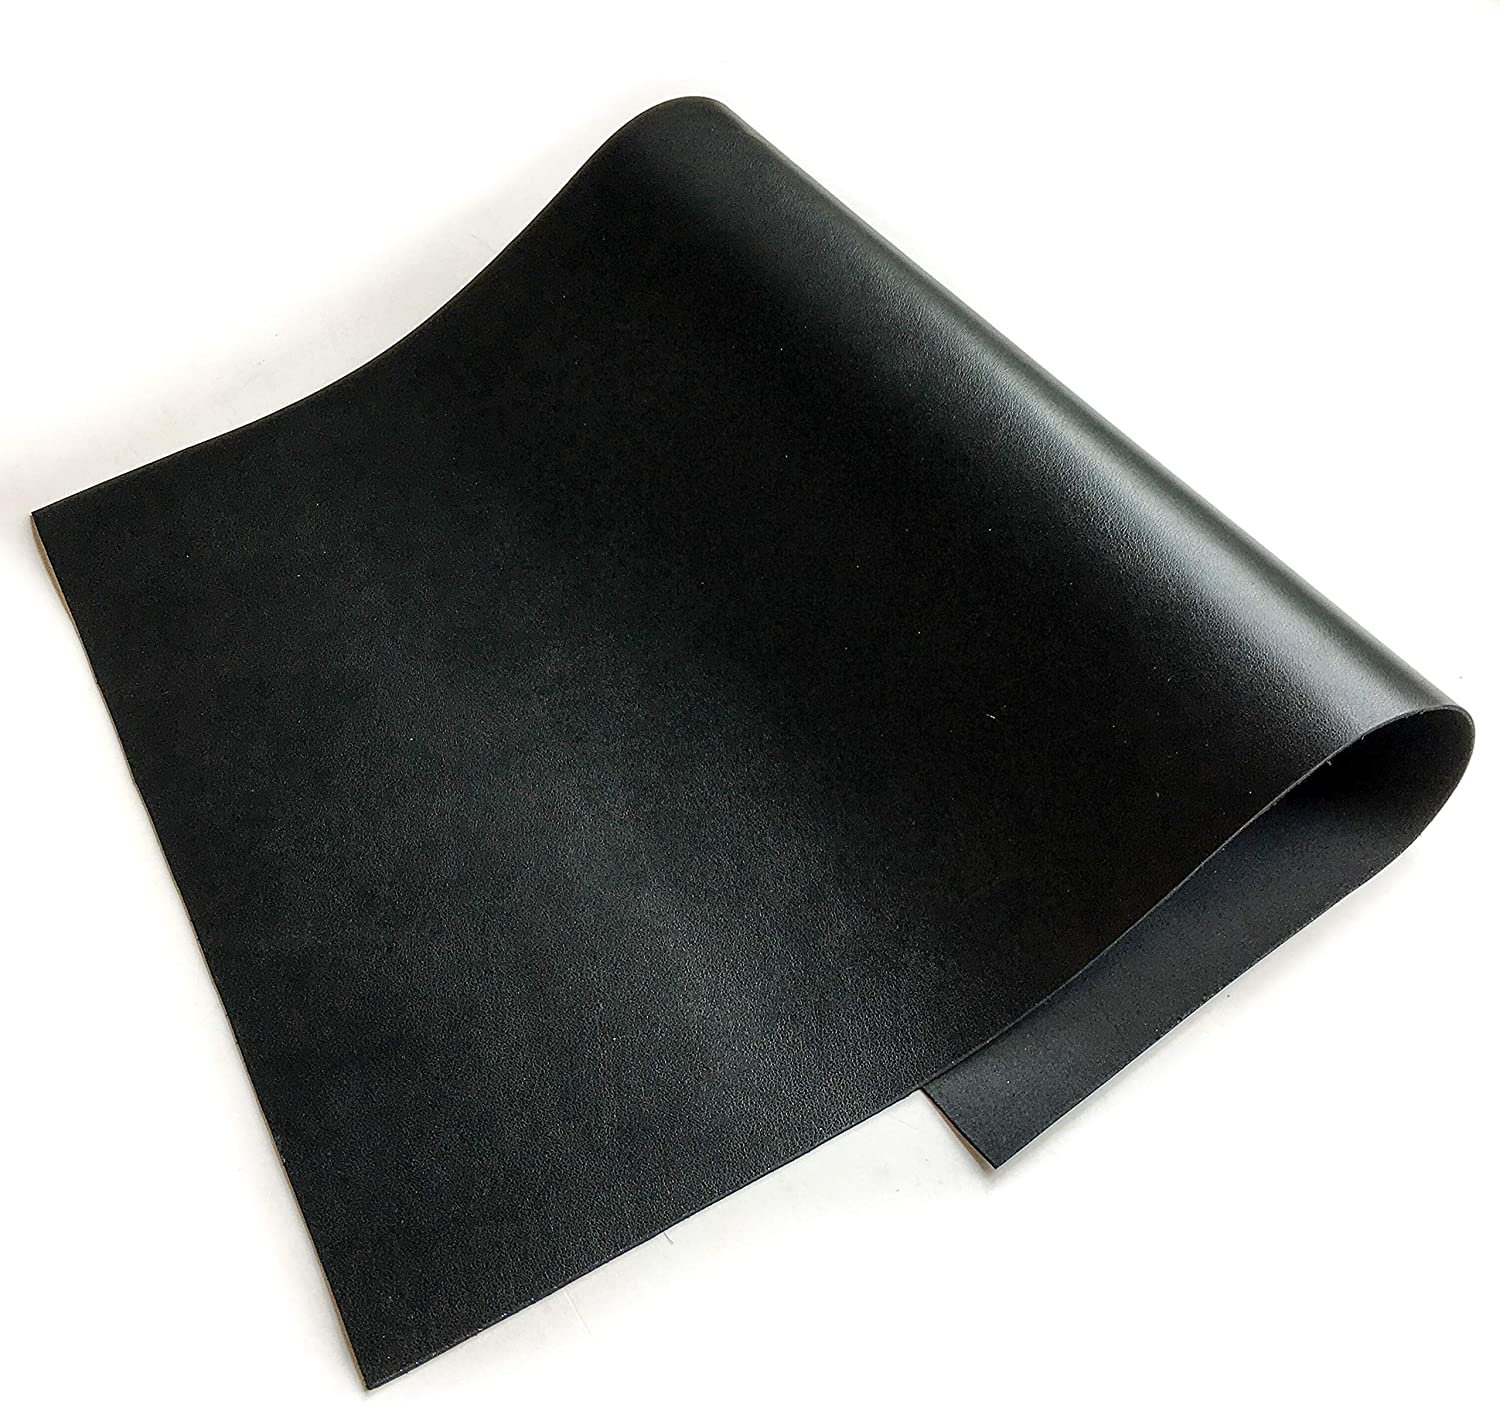 LeatherAA Italian Leather Company Real Genuine Black Calf Hide Leather:Thick Leather Cow Hide Black Leather Sheets - New